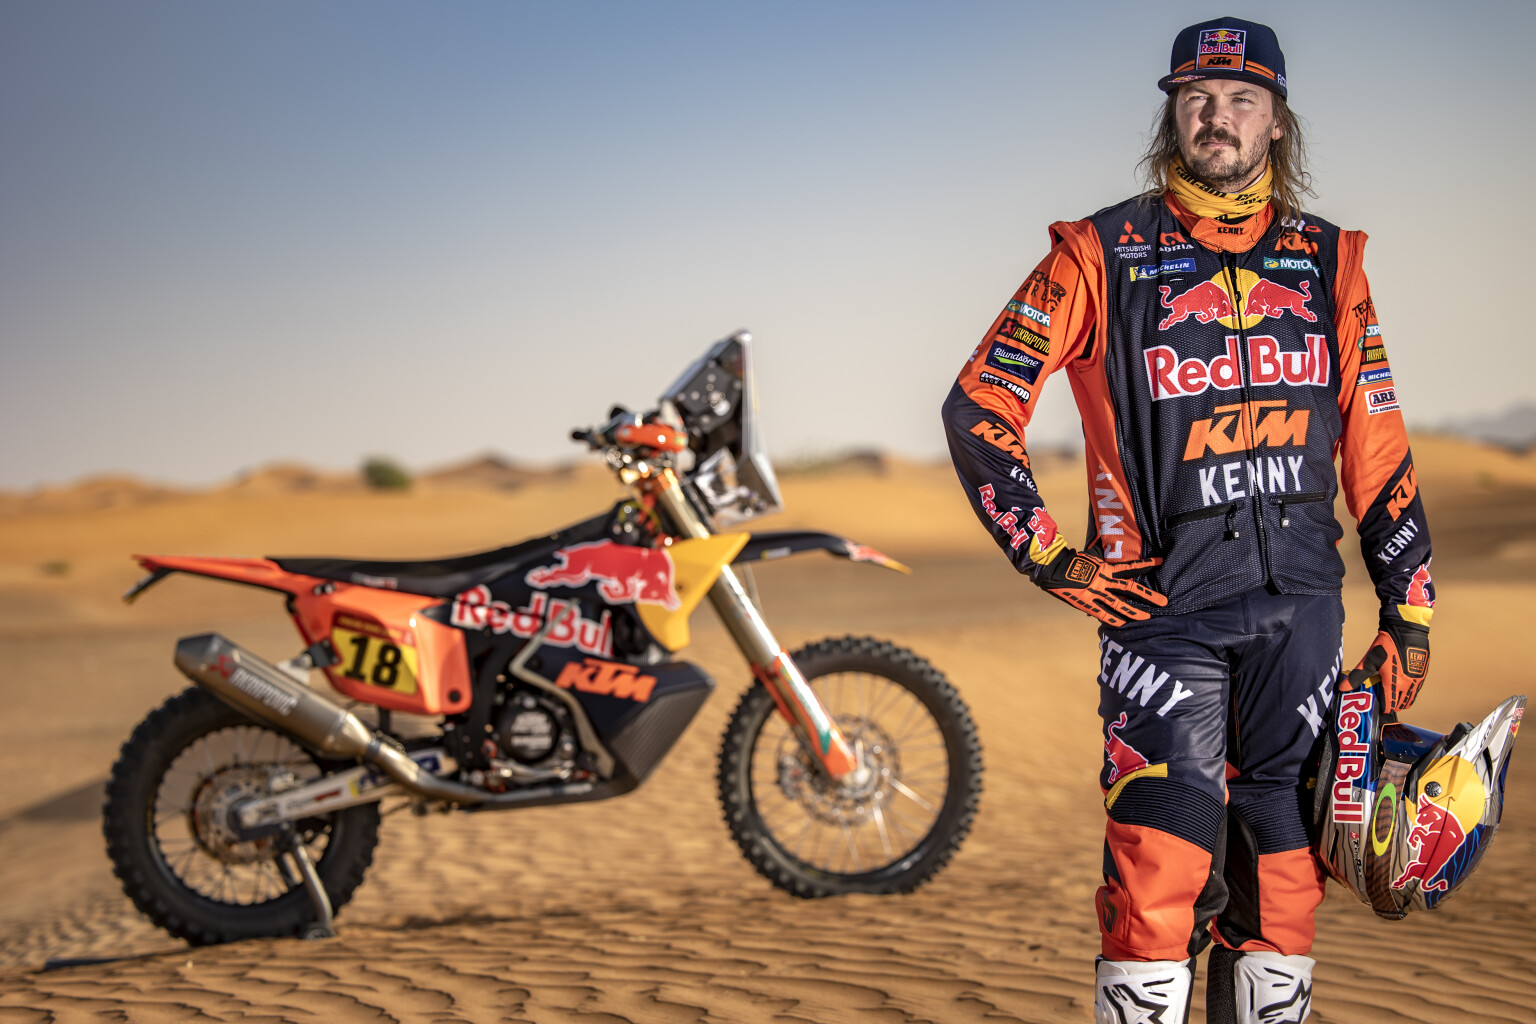 We Chatted With Toby Price Prior To The Start Of His 2022 Dakar Campaign